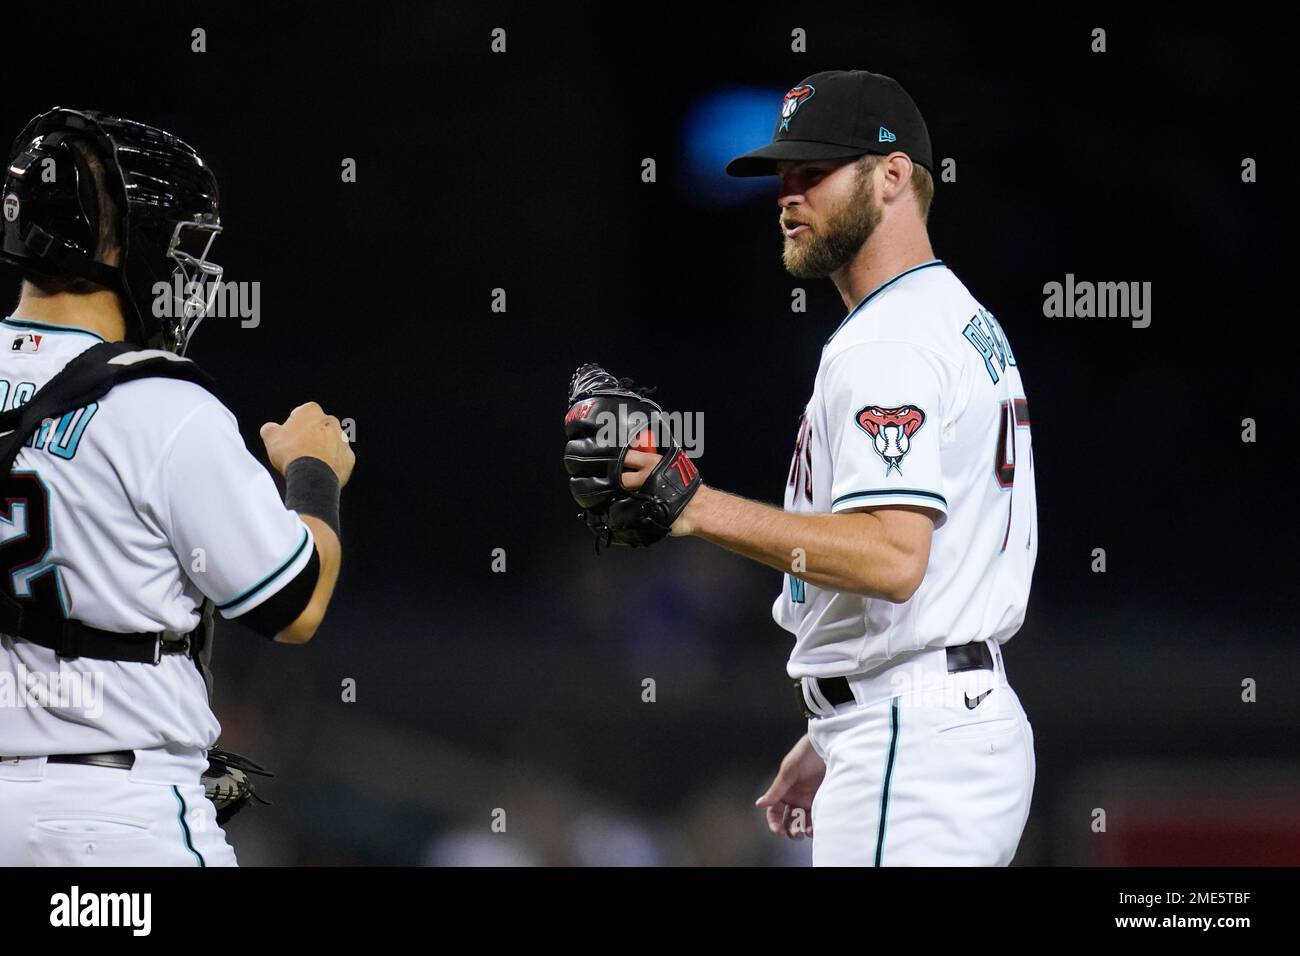 Arizona Diamondbacks relief pitcher Matt Peacock, right, celebrates with catcher Daulton Varsho after the final out in of the teams baseball game against the Pittsburgh Pirates, Tuesday, July 20, 2021, in Phoenix.